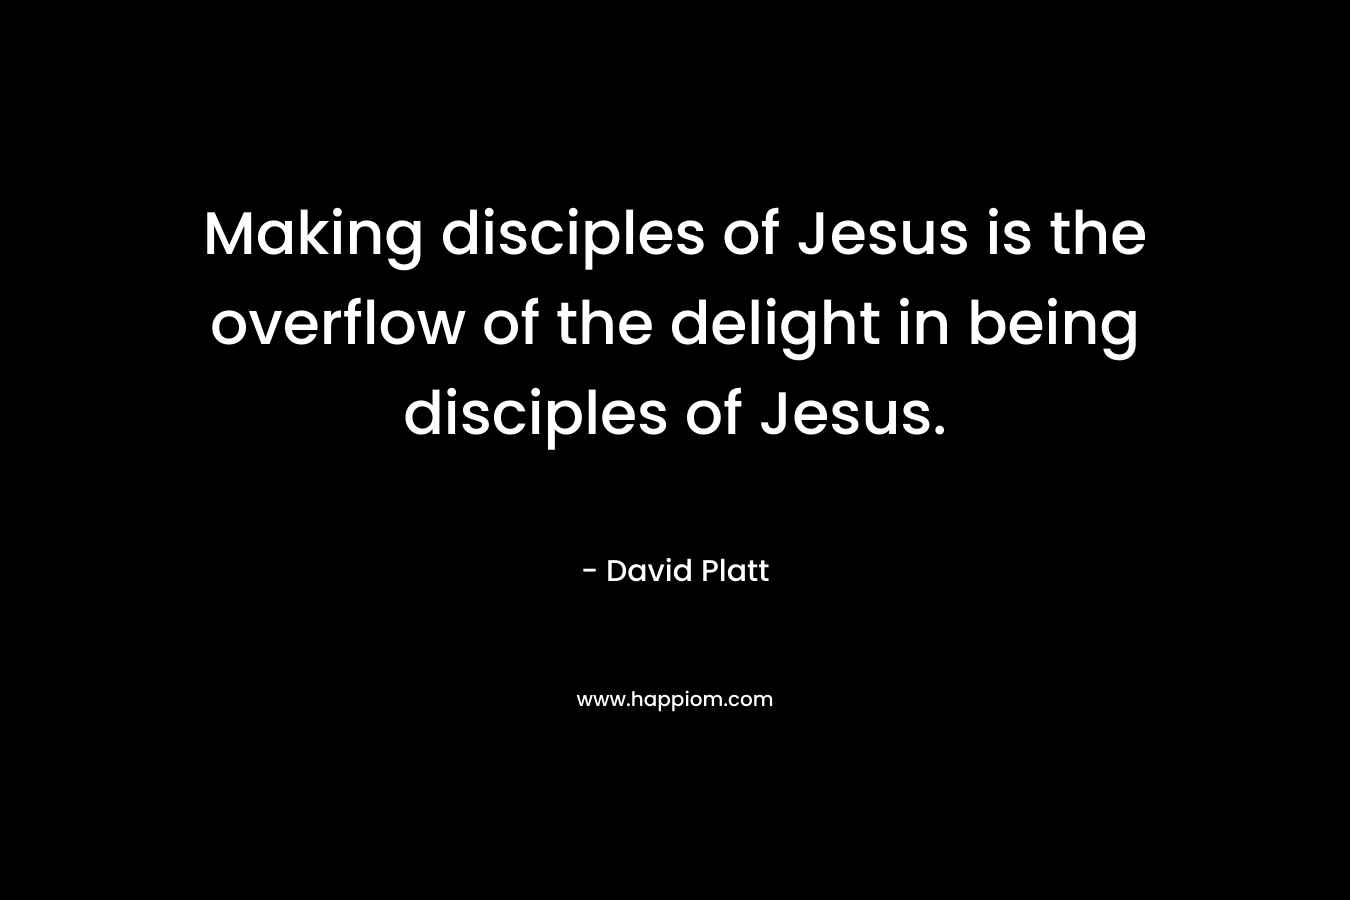 Making disciples of Jesus is the overflow of the delight in being disciples of Jesus. – David Platt